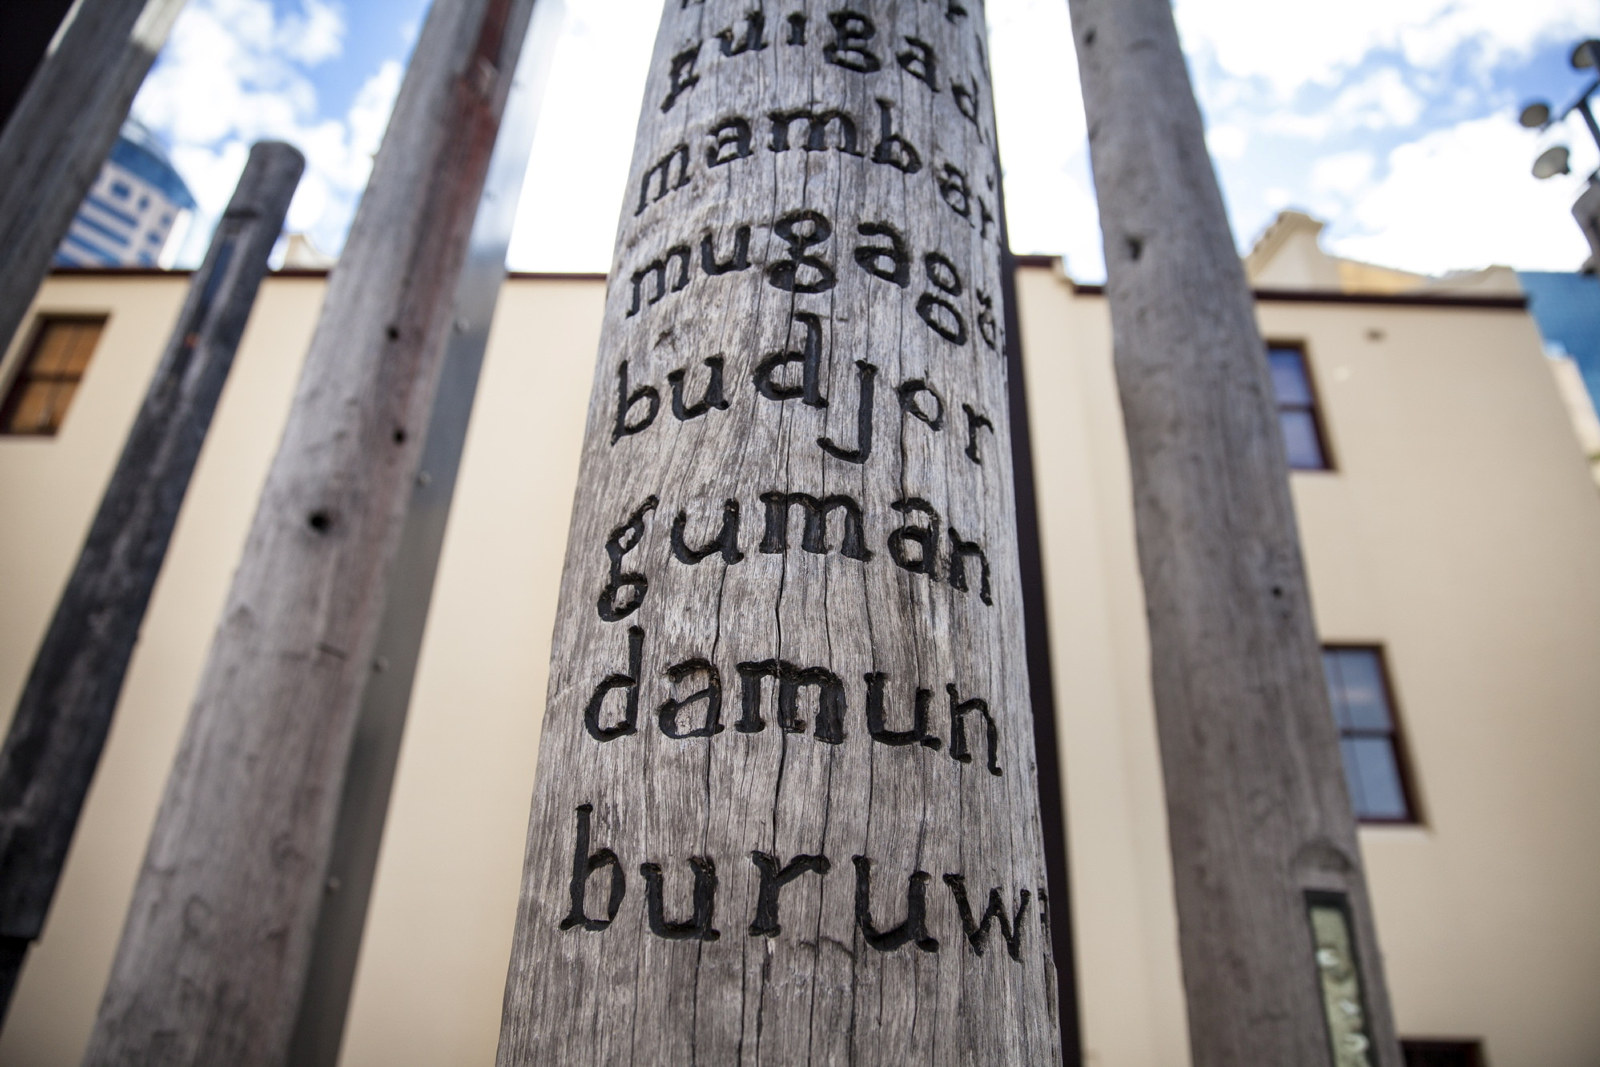 Wooden posts with carved words in indigenous languages.